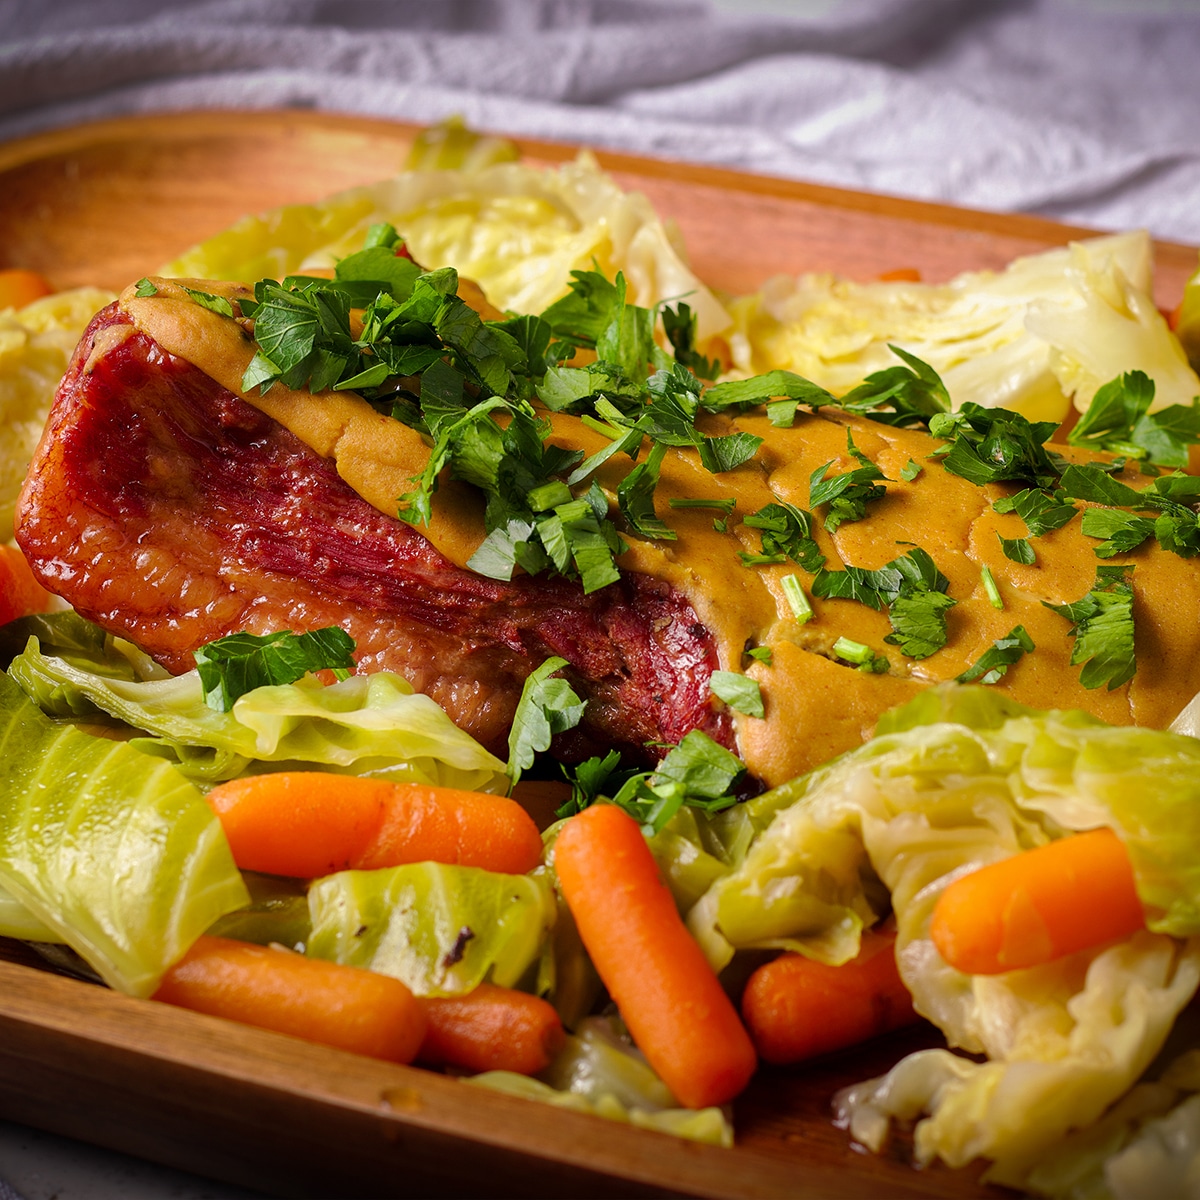 Corned beef covered in mustard sauce and surrounded by cooked cabbage and carrots.